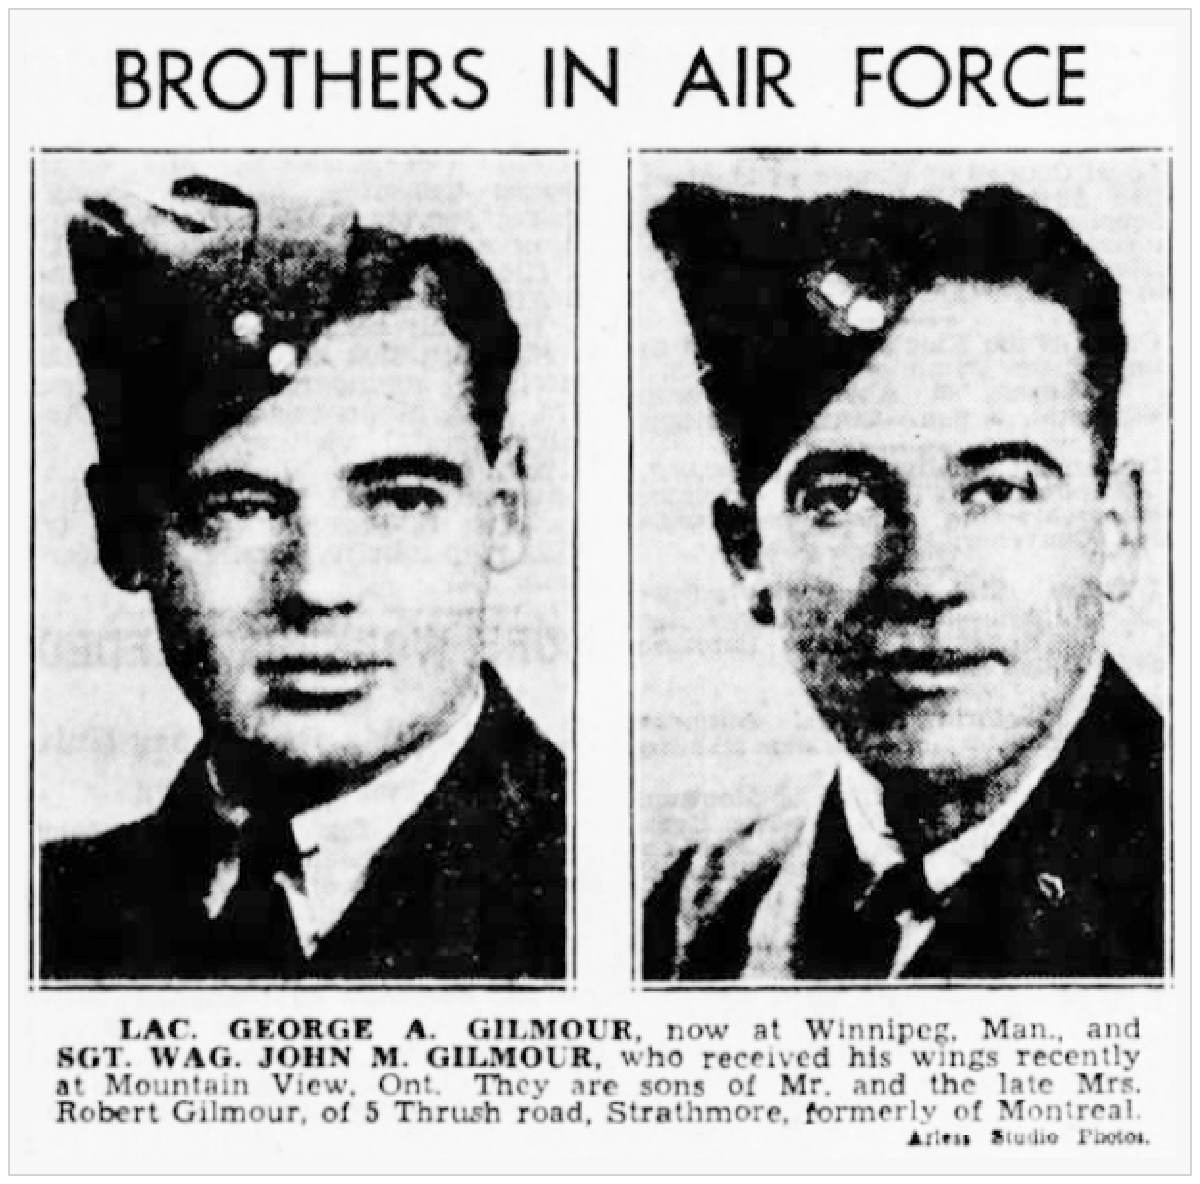 Gilmour brothers in Air Force